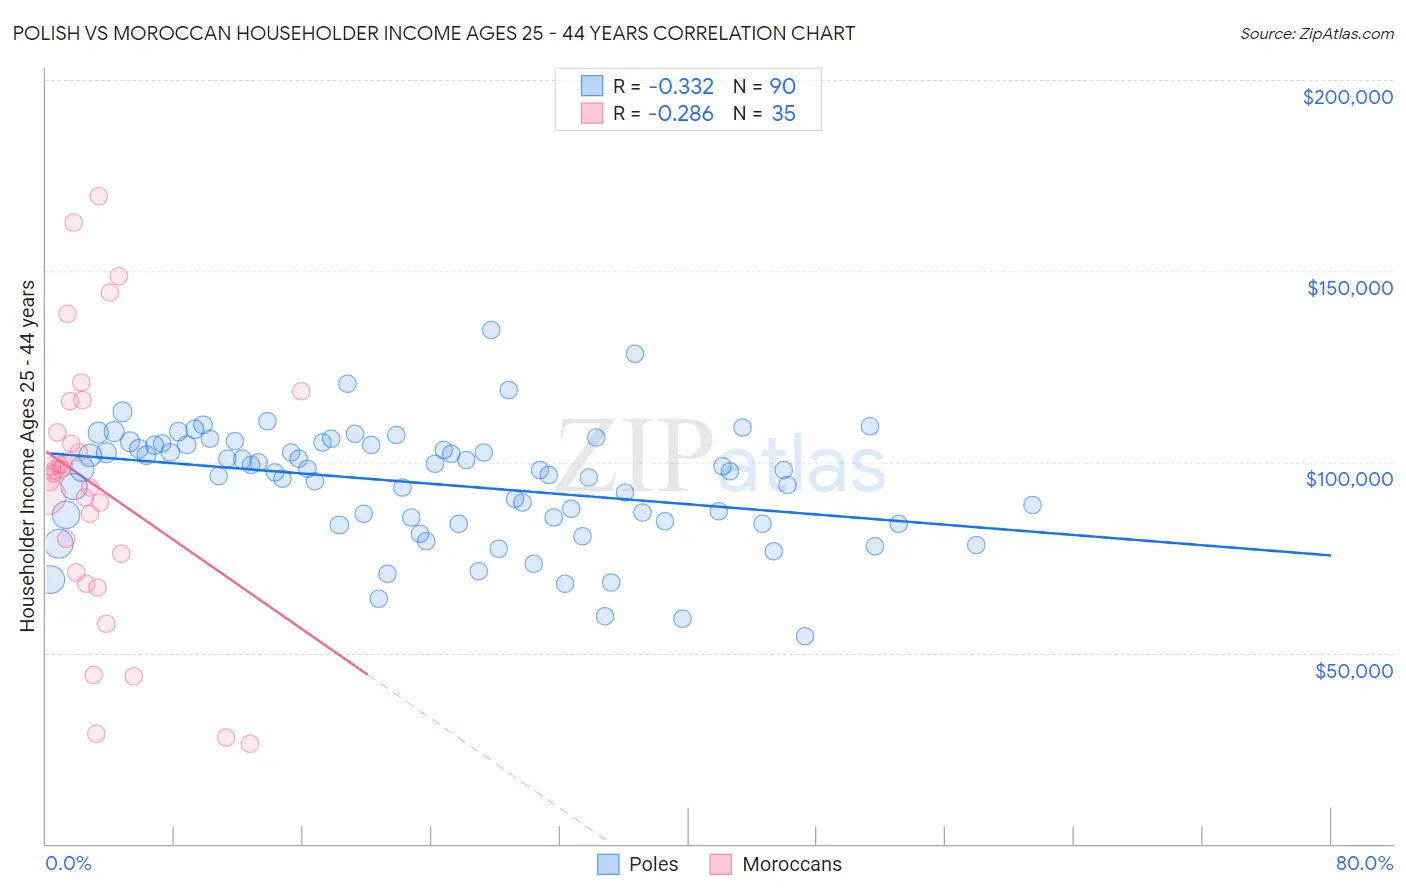 Polish vs Moroccan Householder Income Ages 25 - 44 years